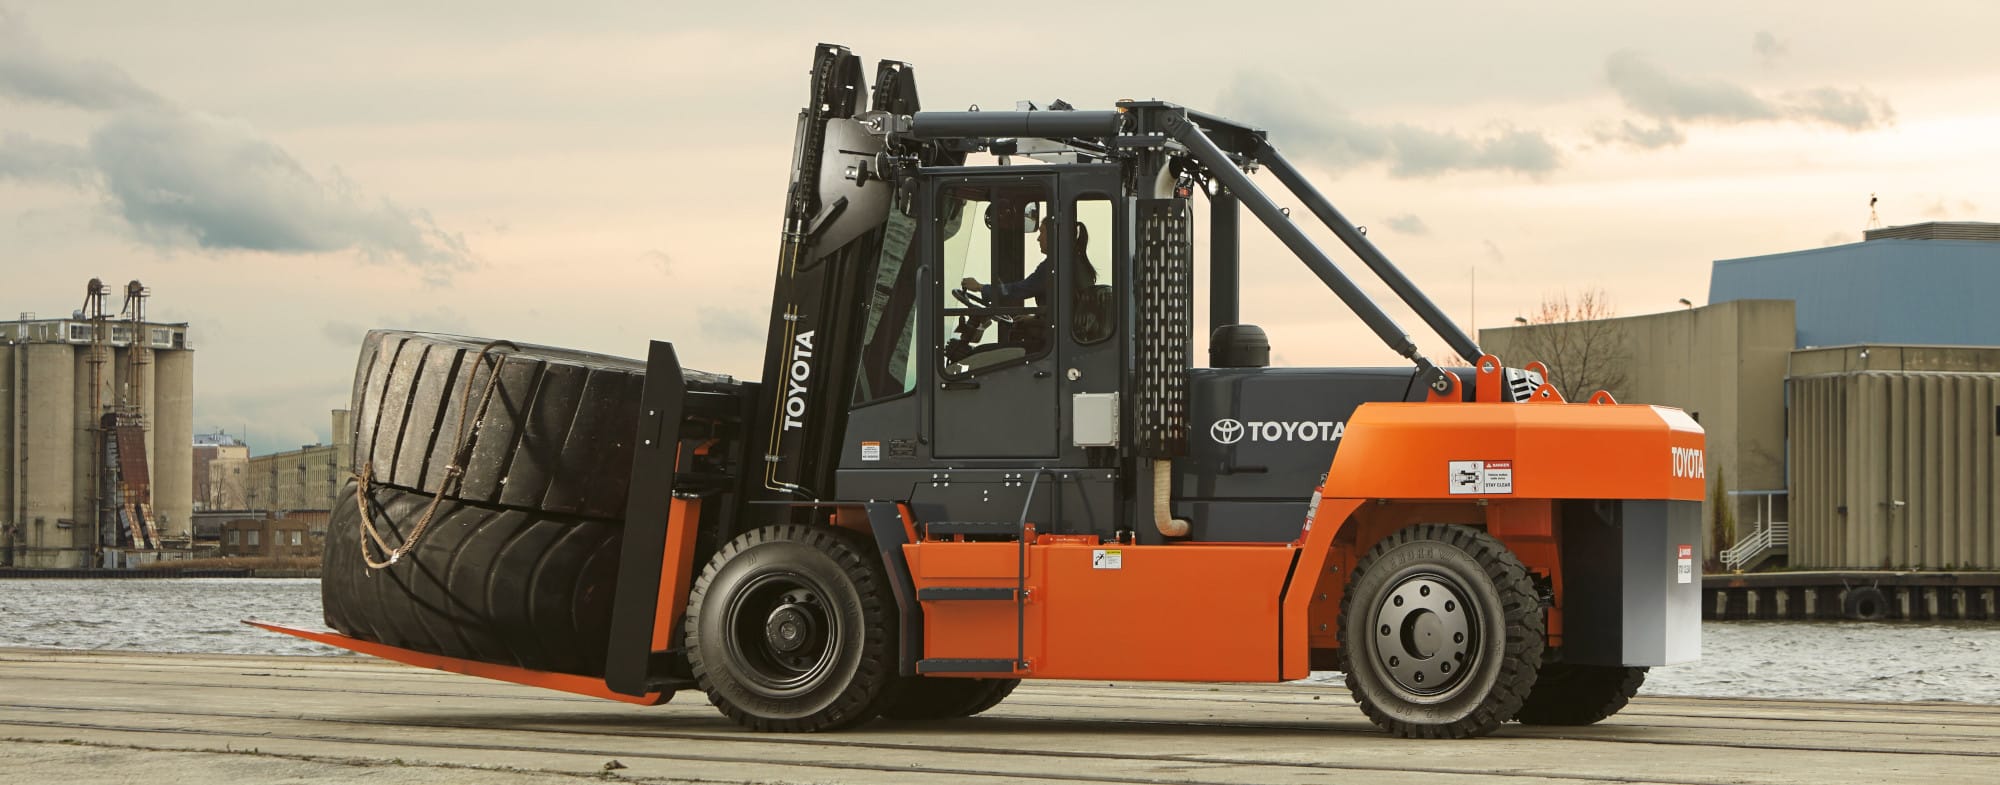 Looking for that “hard to find” large capacity forklift?